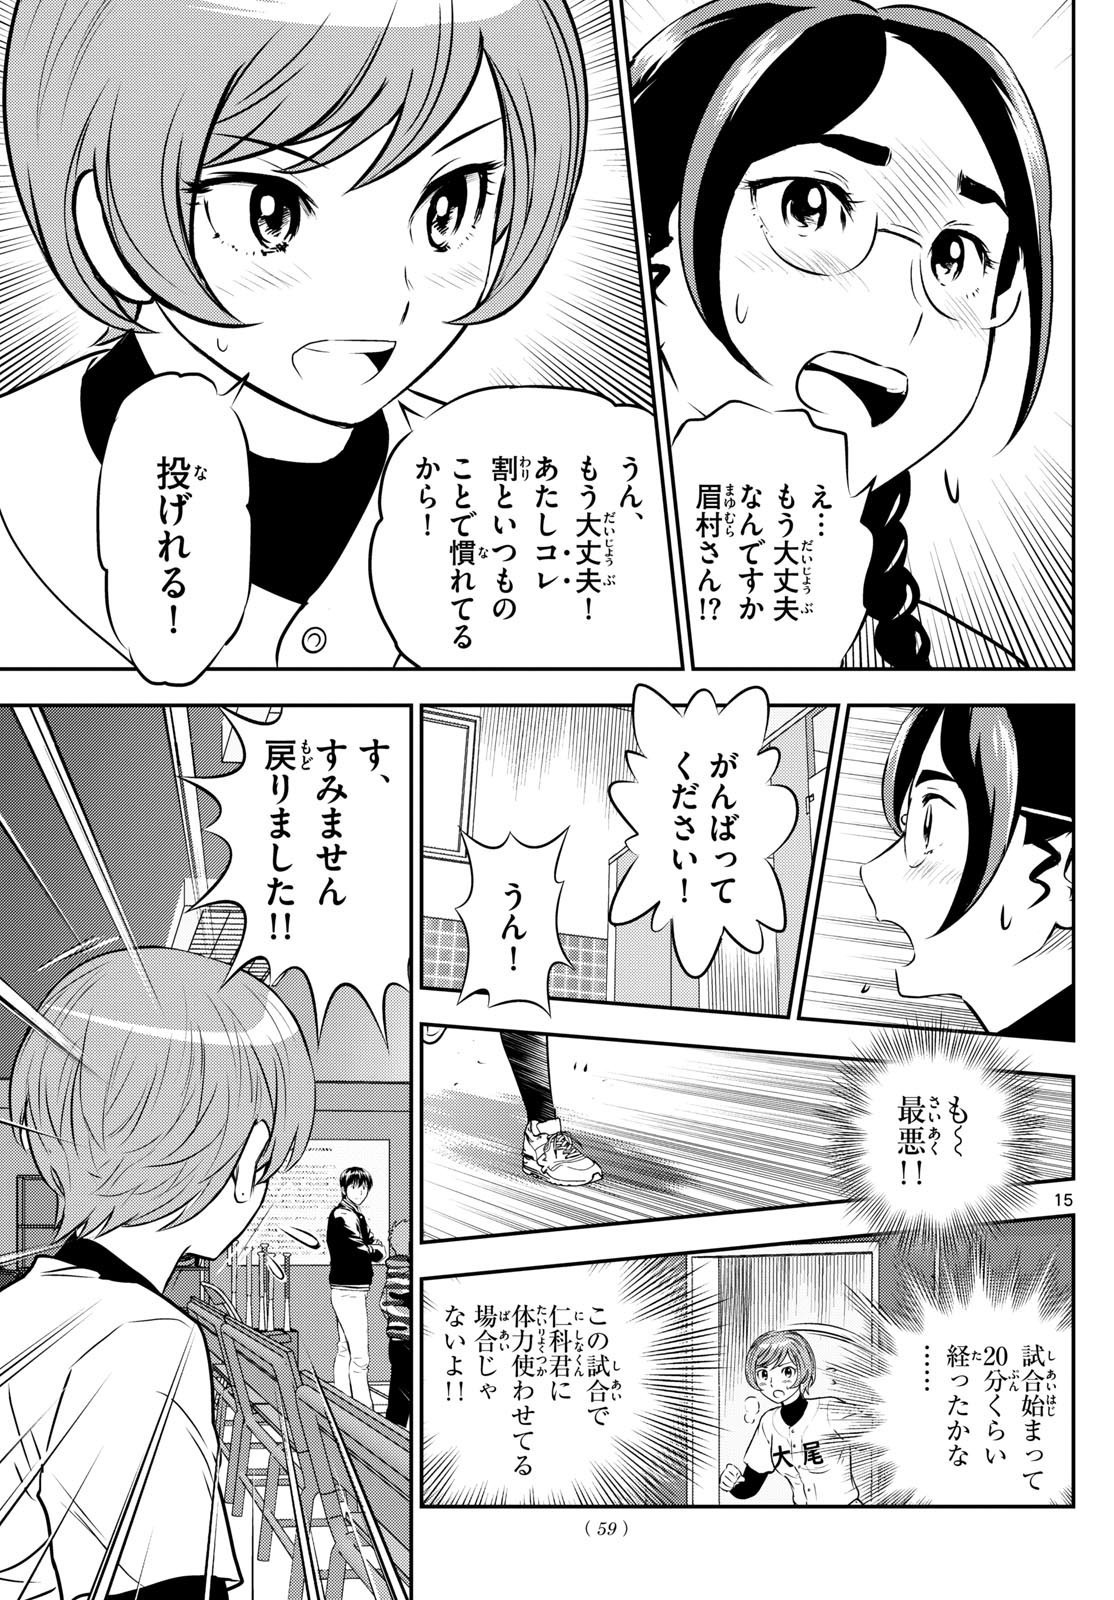 Major 2nd - メジャーセカンド - Chapter 283 - Page 15